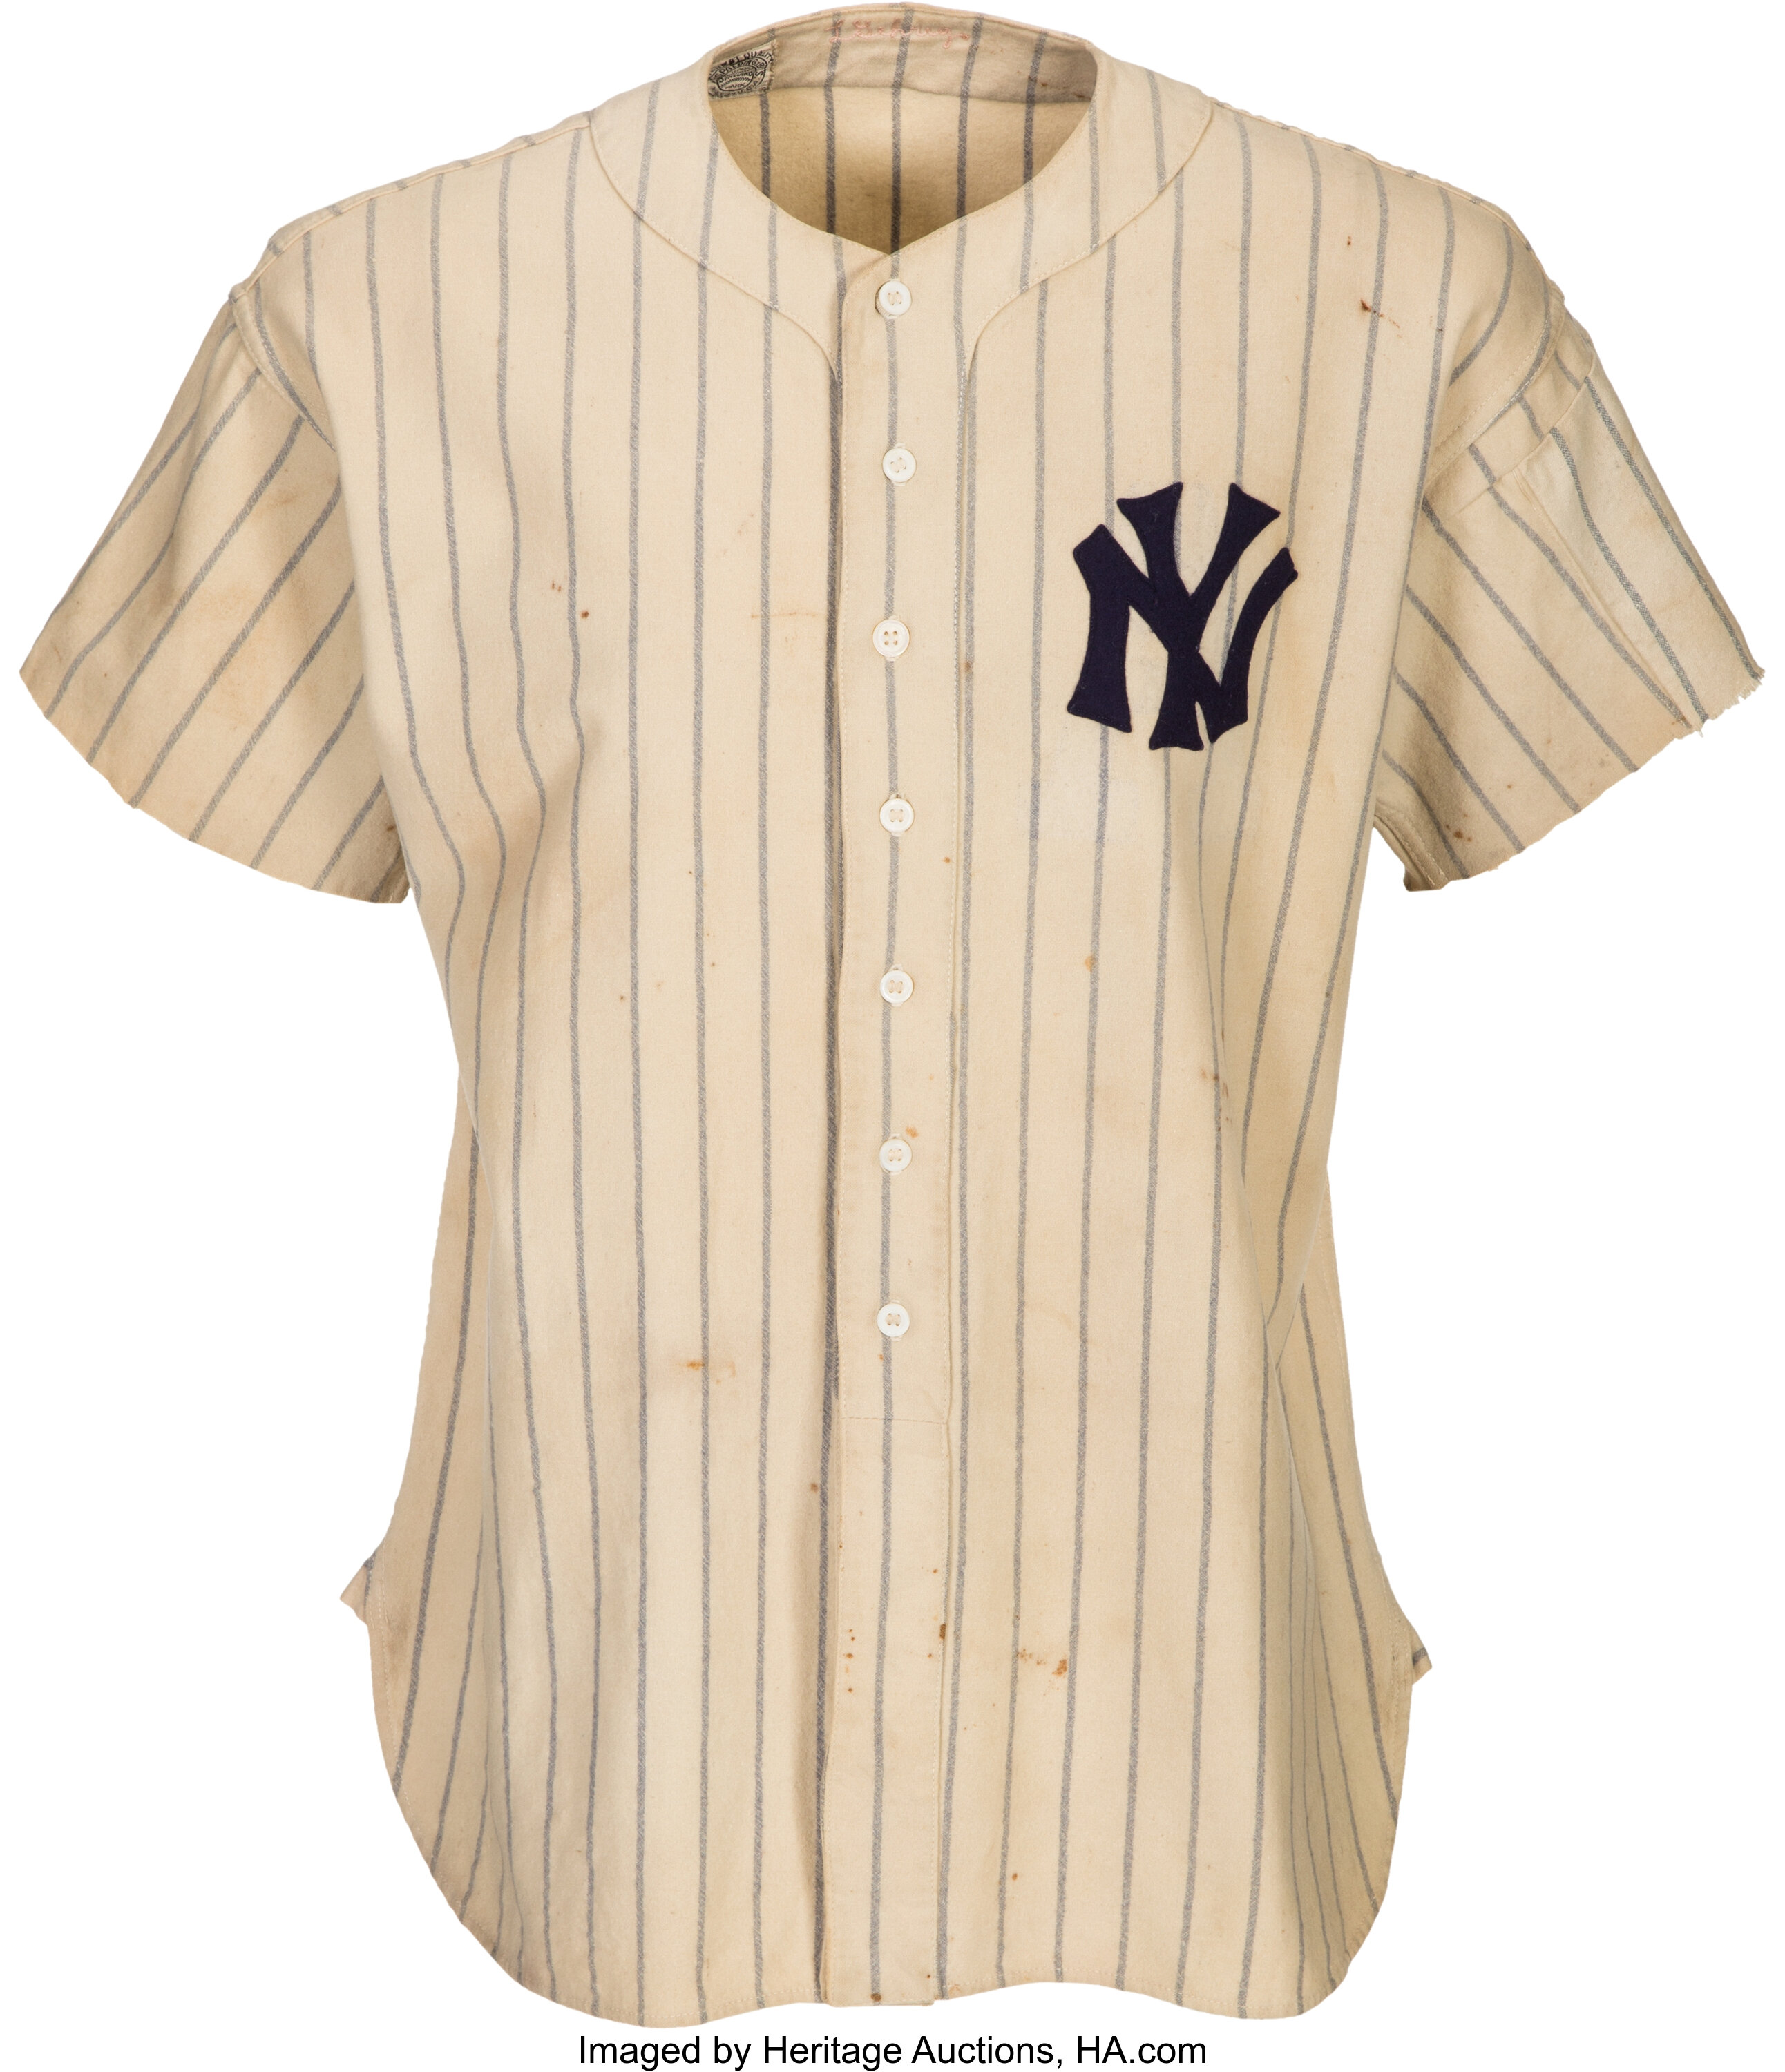 Game-worn Lou Gehrig jersey was the second-highest selling lot in